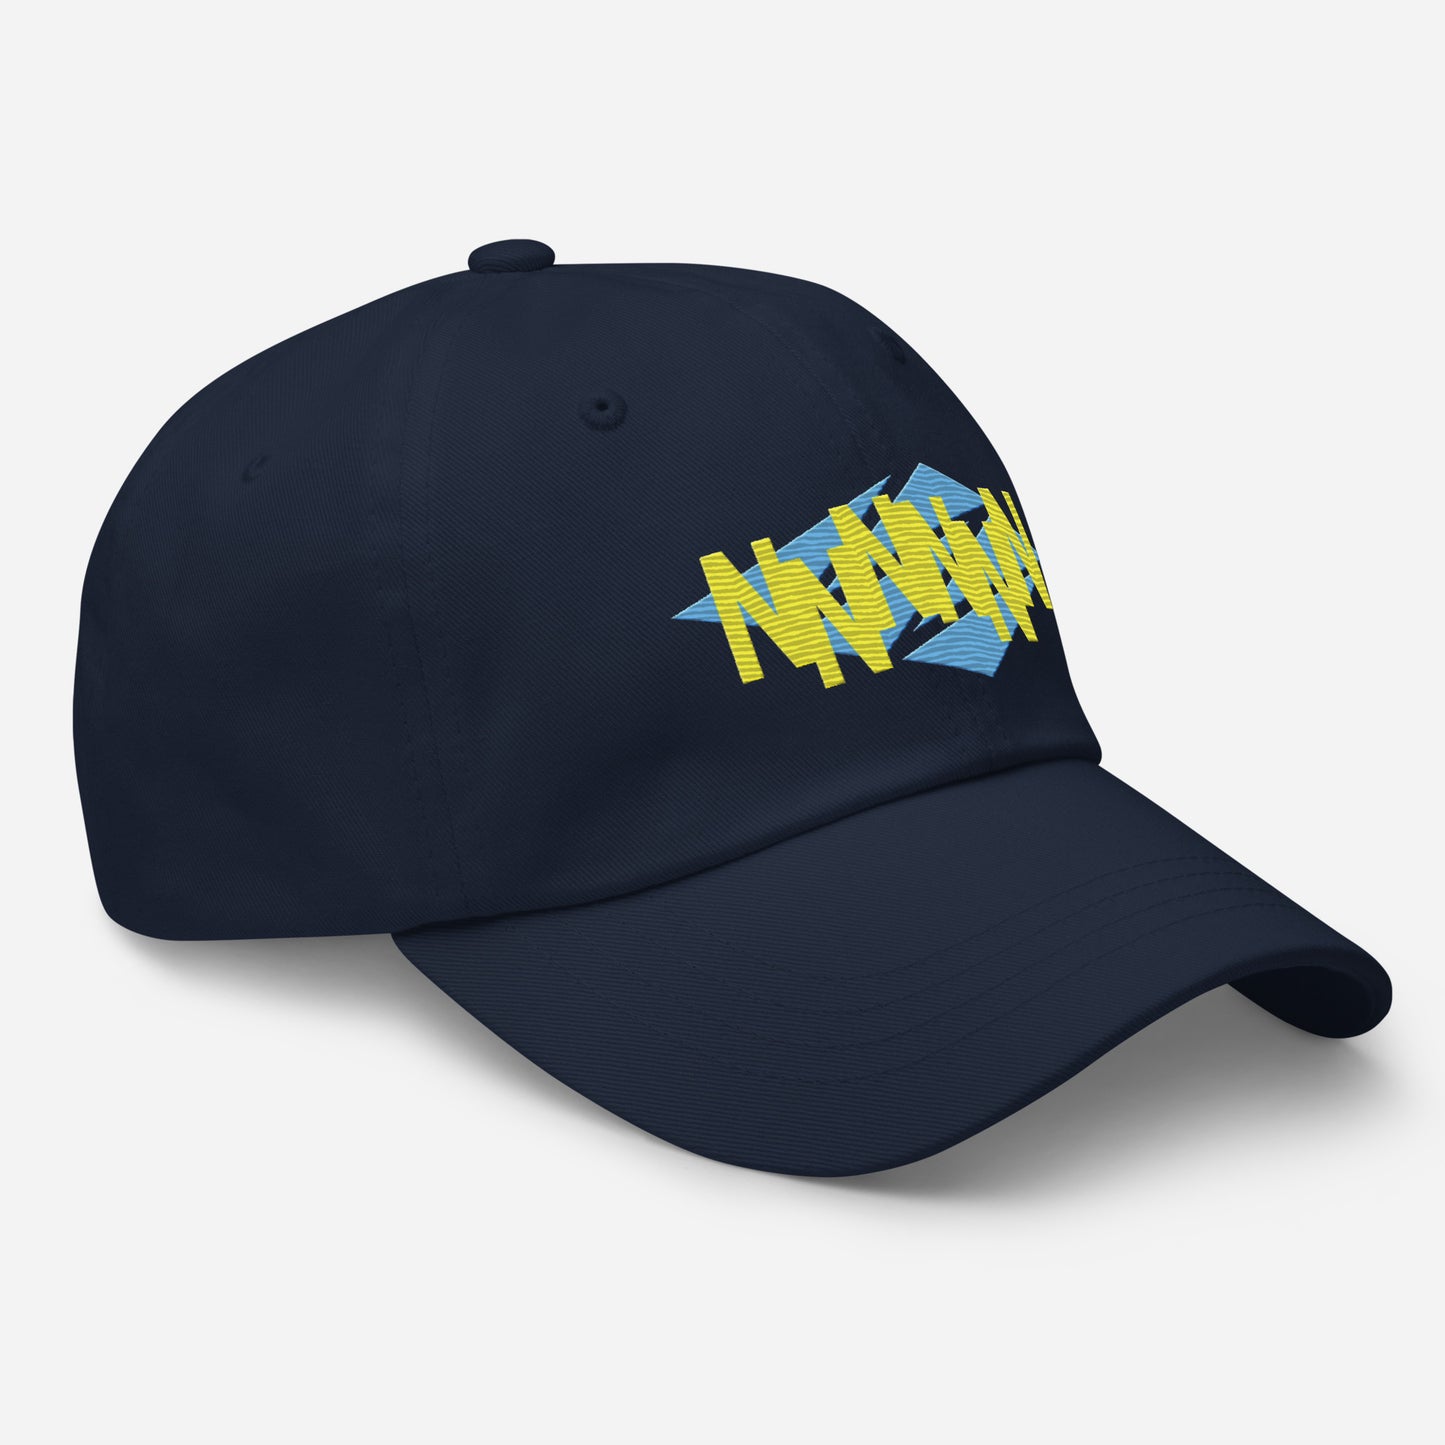 N Angles Dad hat